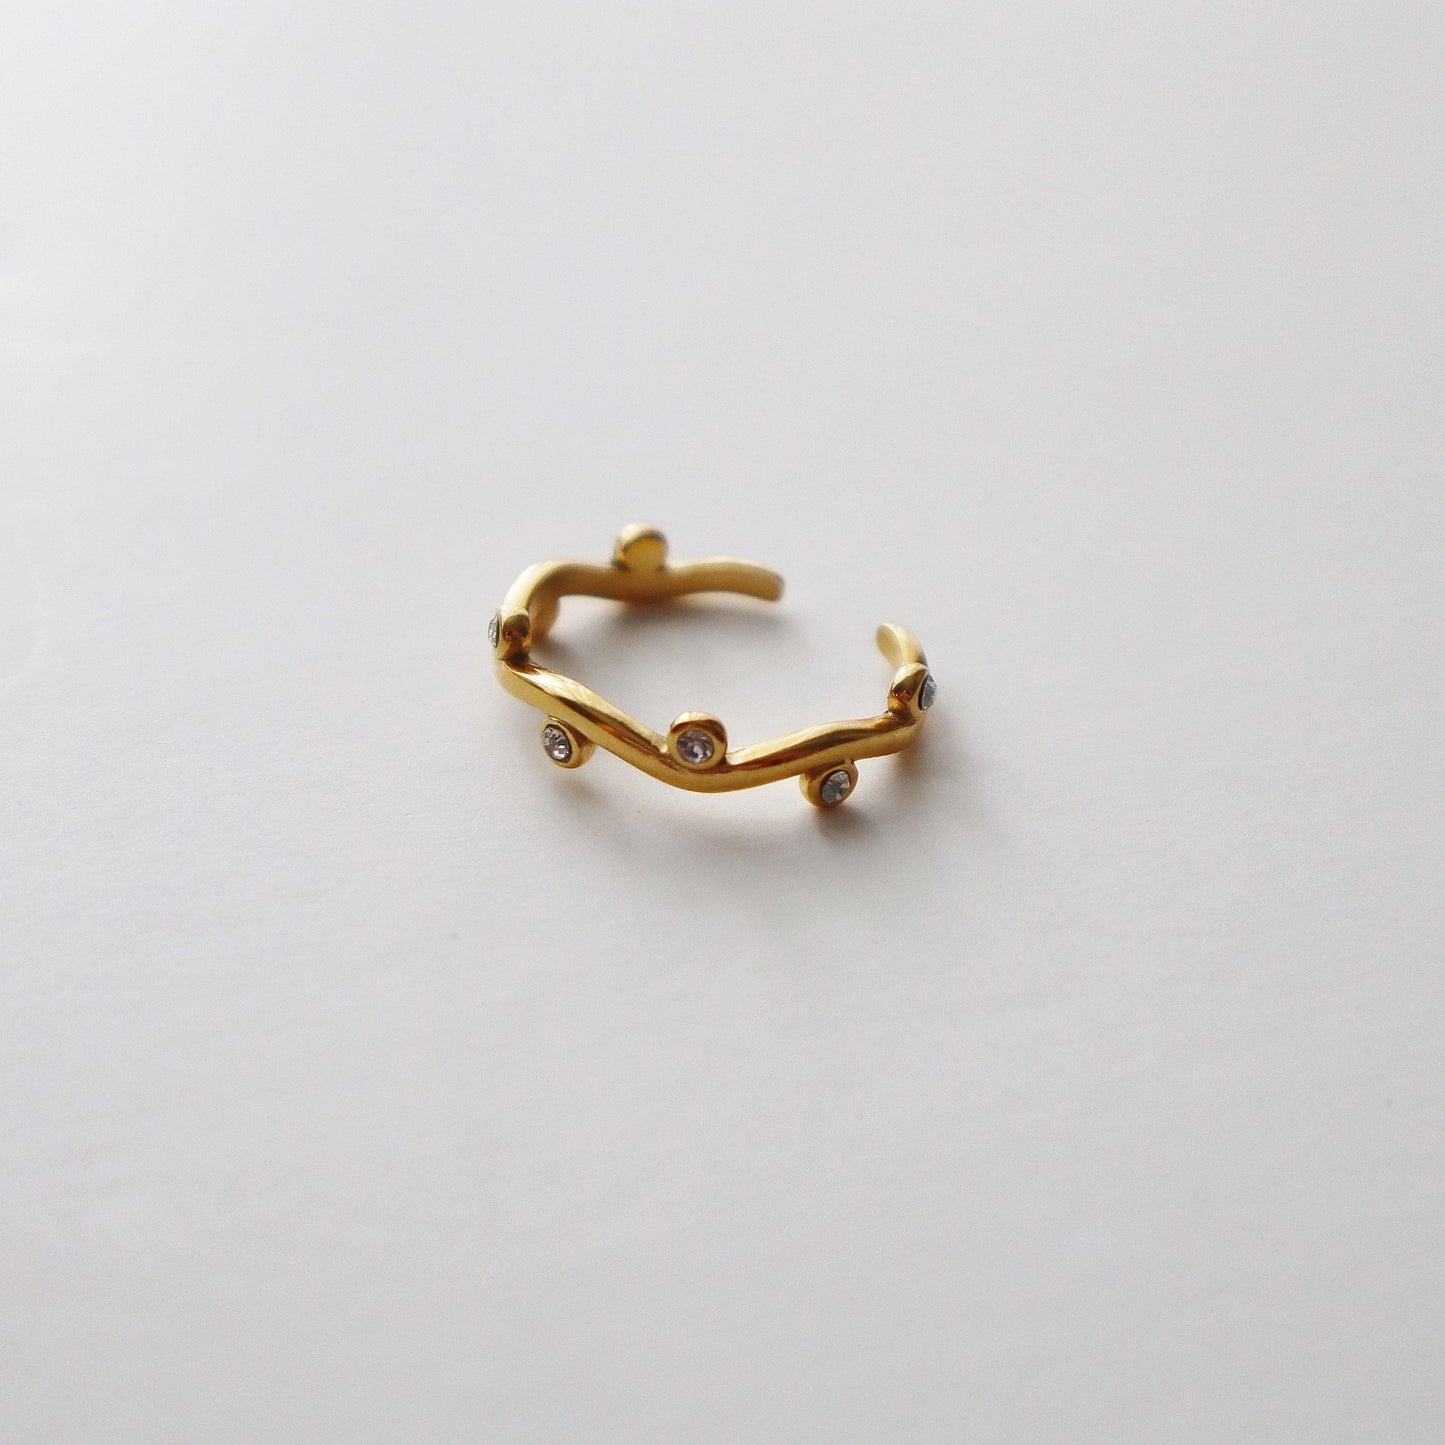 Vine Ring | CZ Adjustable Ring - JESSA JEWELRY | GOLD JEWELRY; dainty, affordable gold everyday jewelry. Tarnish free, water-resistant, hypoallergenic. Jewelry for everyday wear